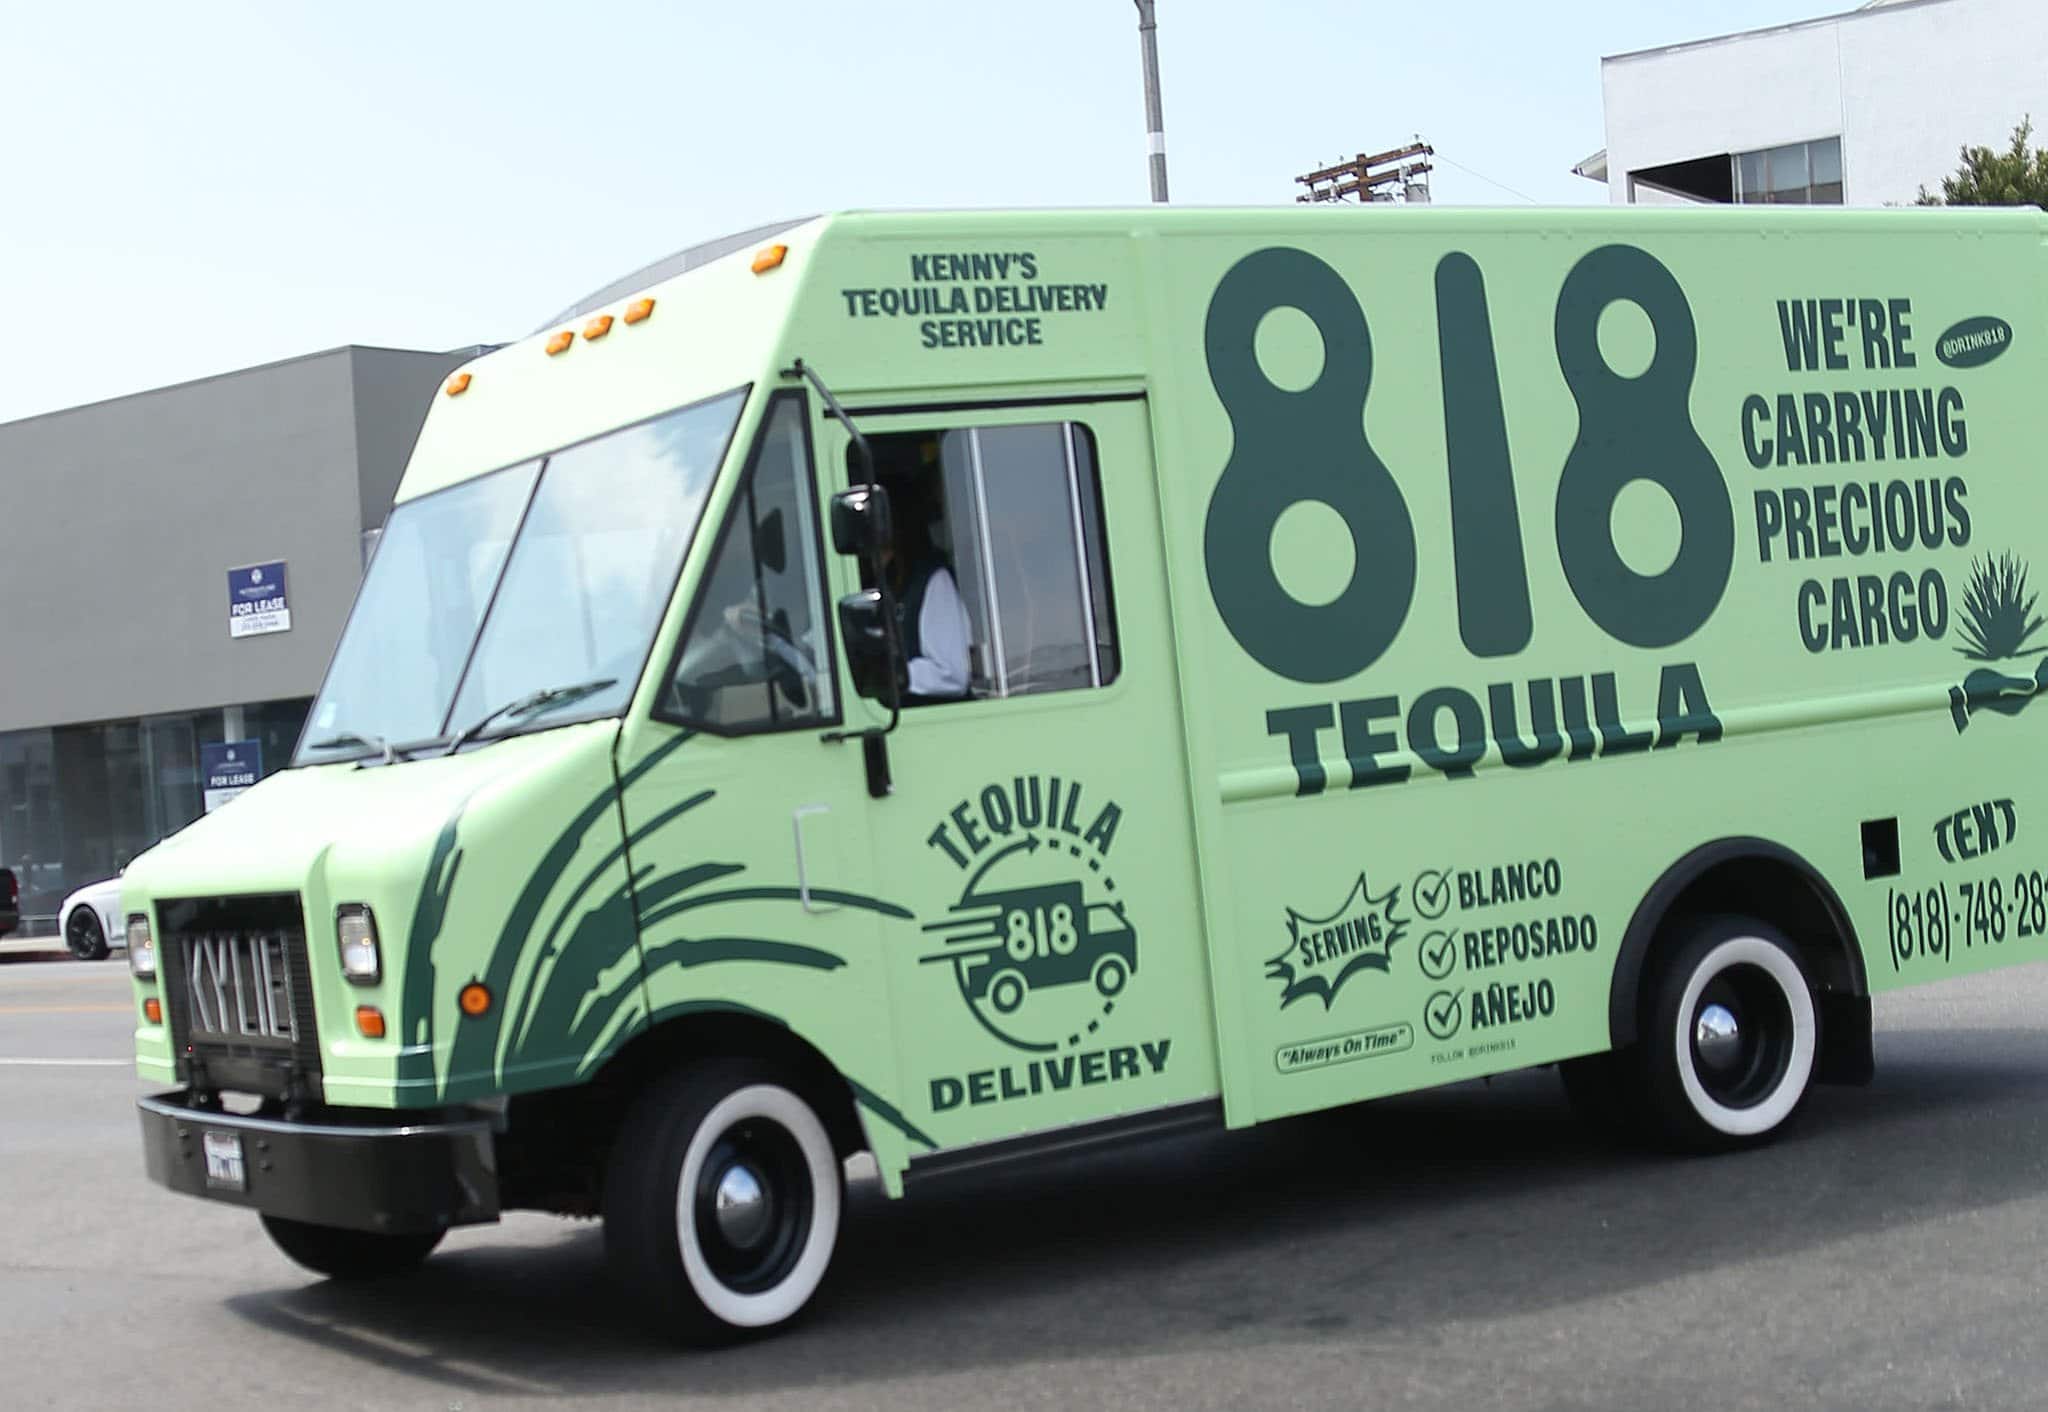 Kendall Jenner personally delivers her 818 Tequila brand to different stores in California